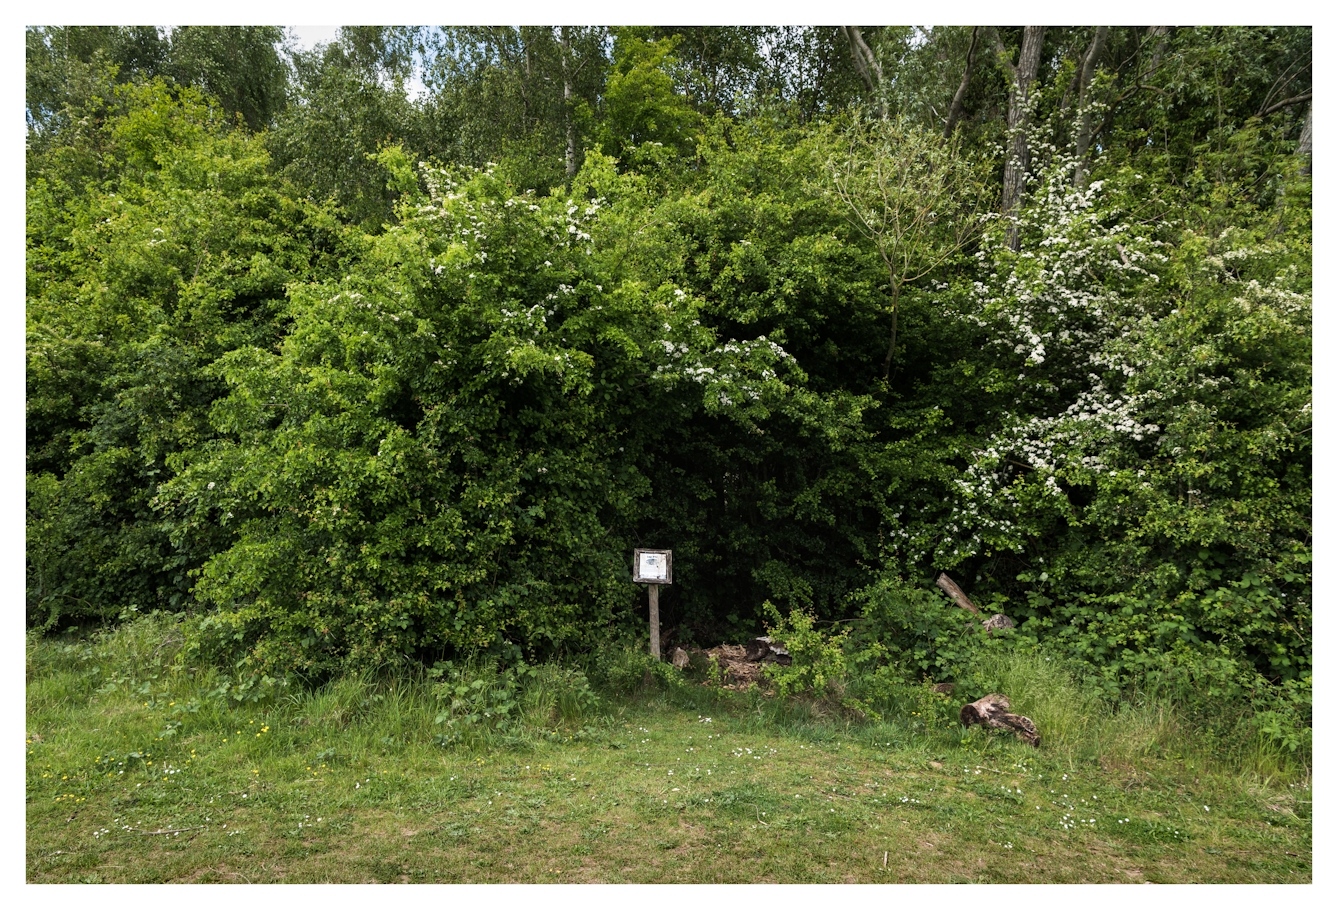 Colour photograph of a green swathe of trees and shrubs in a country park setting. In the centre of the image is a small wooden board on a post with a white information sheet attached to it. To the right of the sign a small pile of logs can just be seen nestled in the undergrowth.